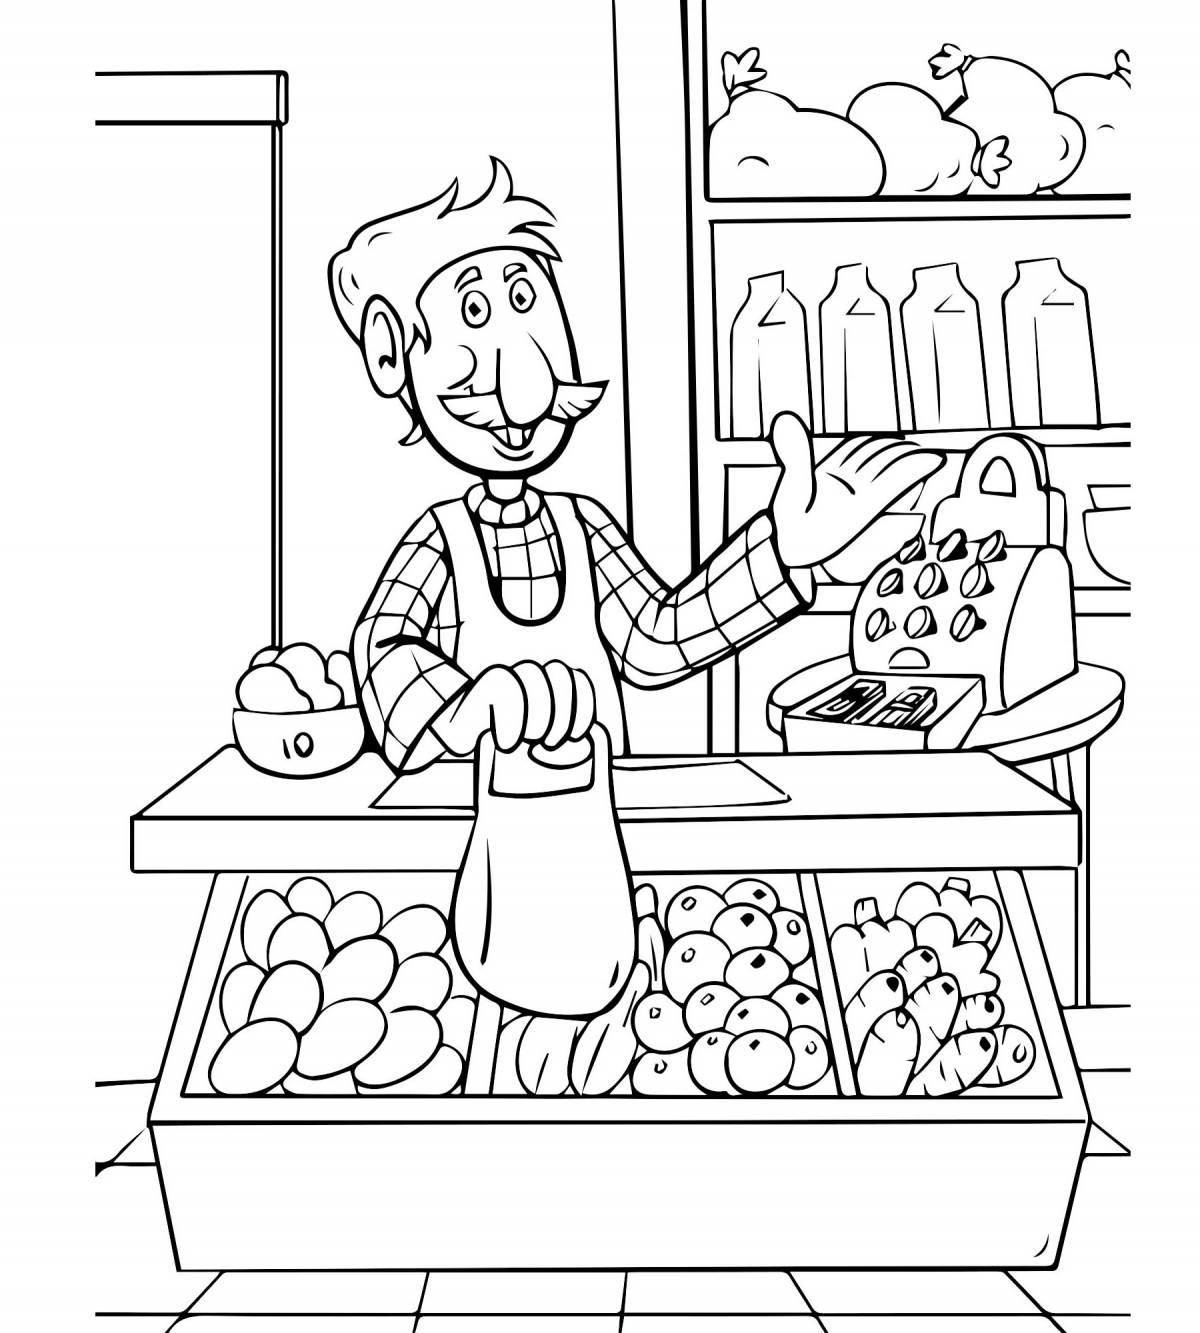 Marvelous coloring page